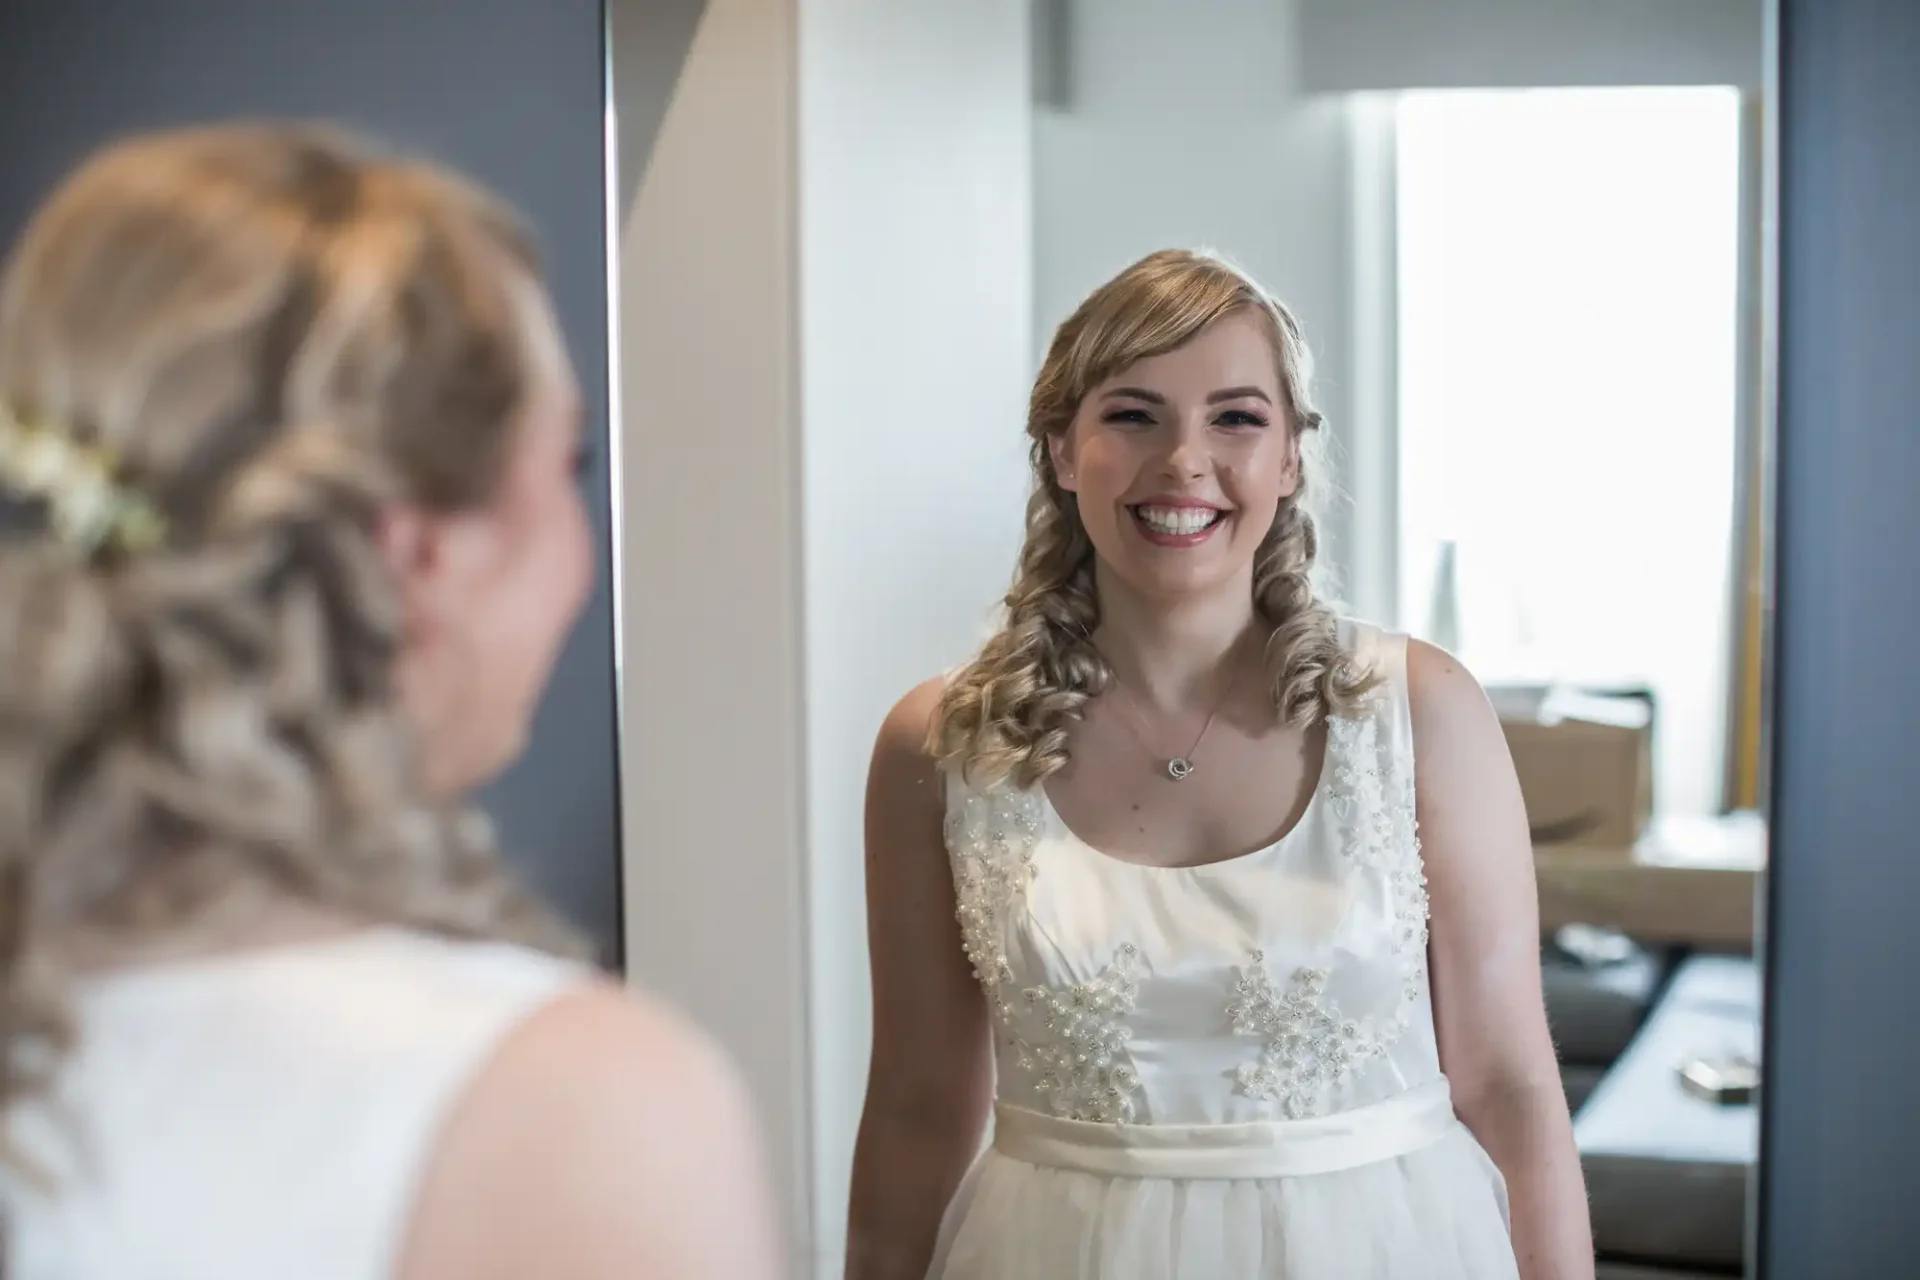 A woman in a white wedding dress smiling at her reflection in a mirror, with a styled braid and floral hair accessory.